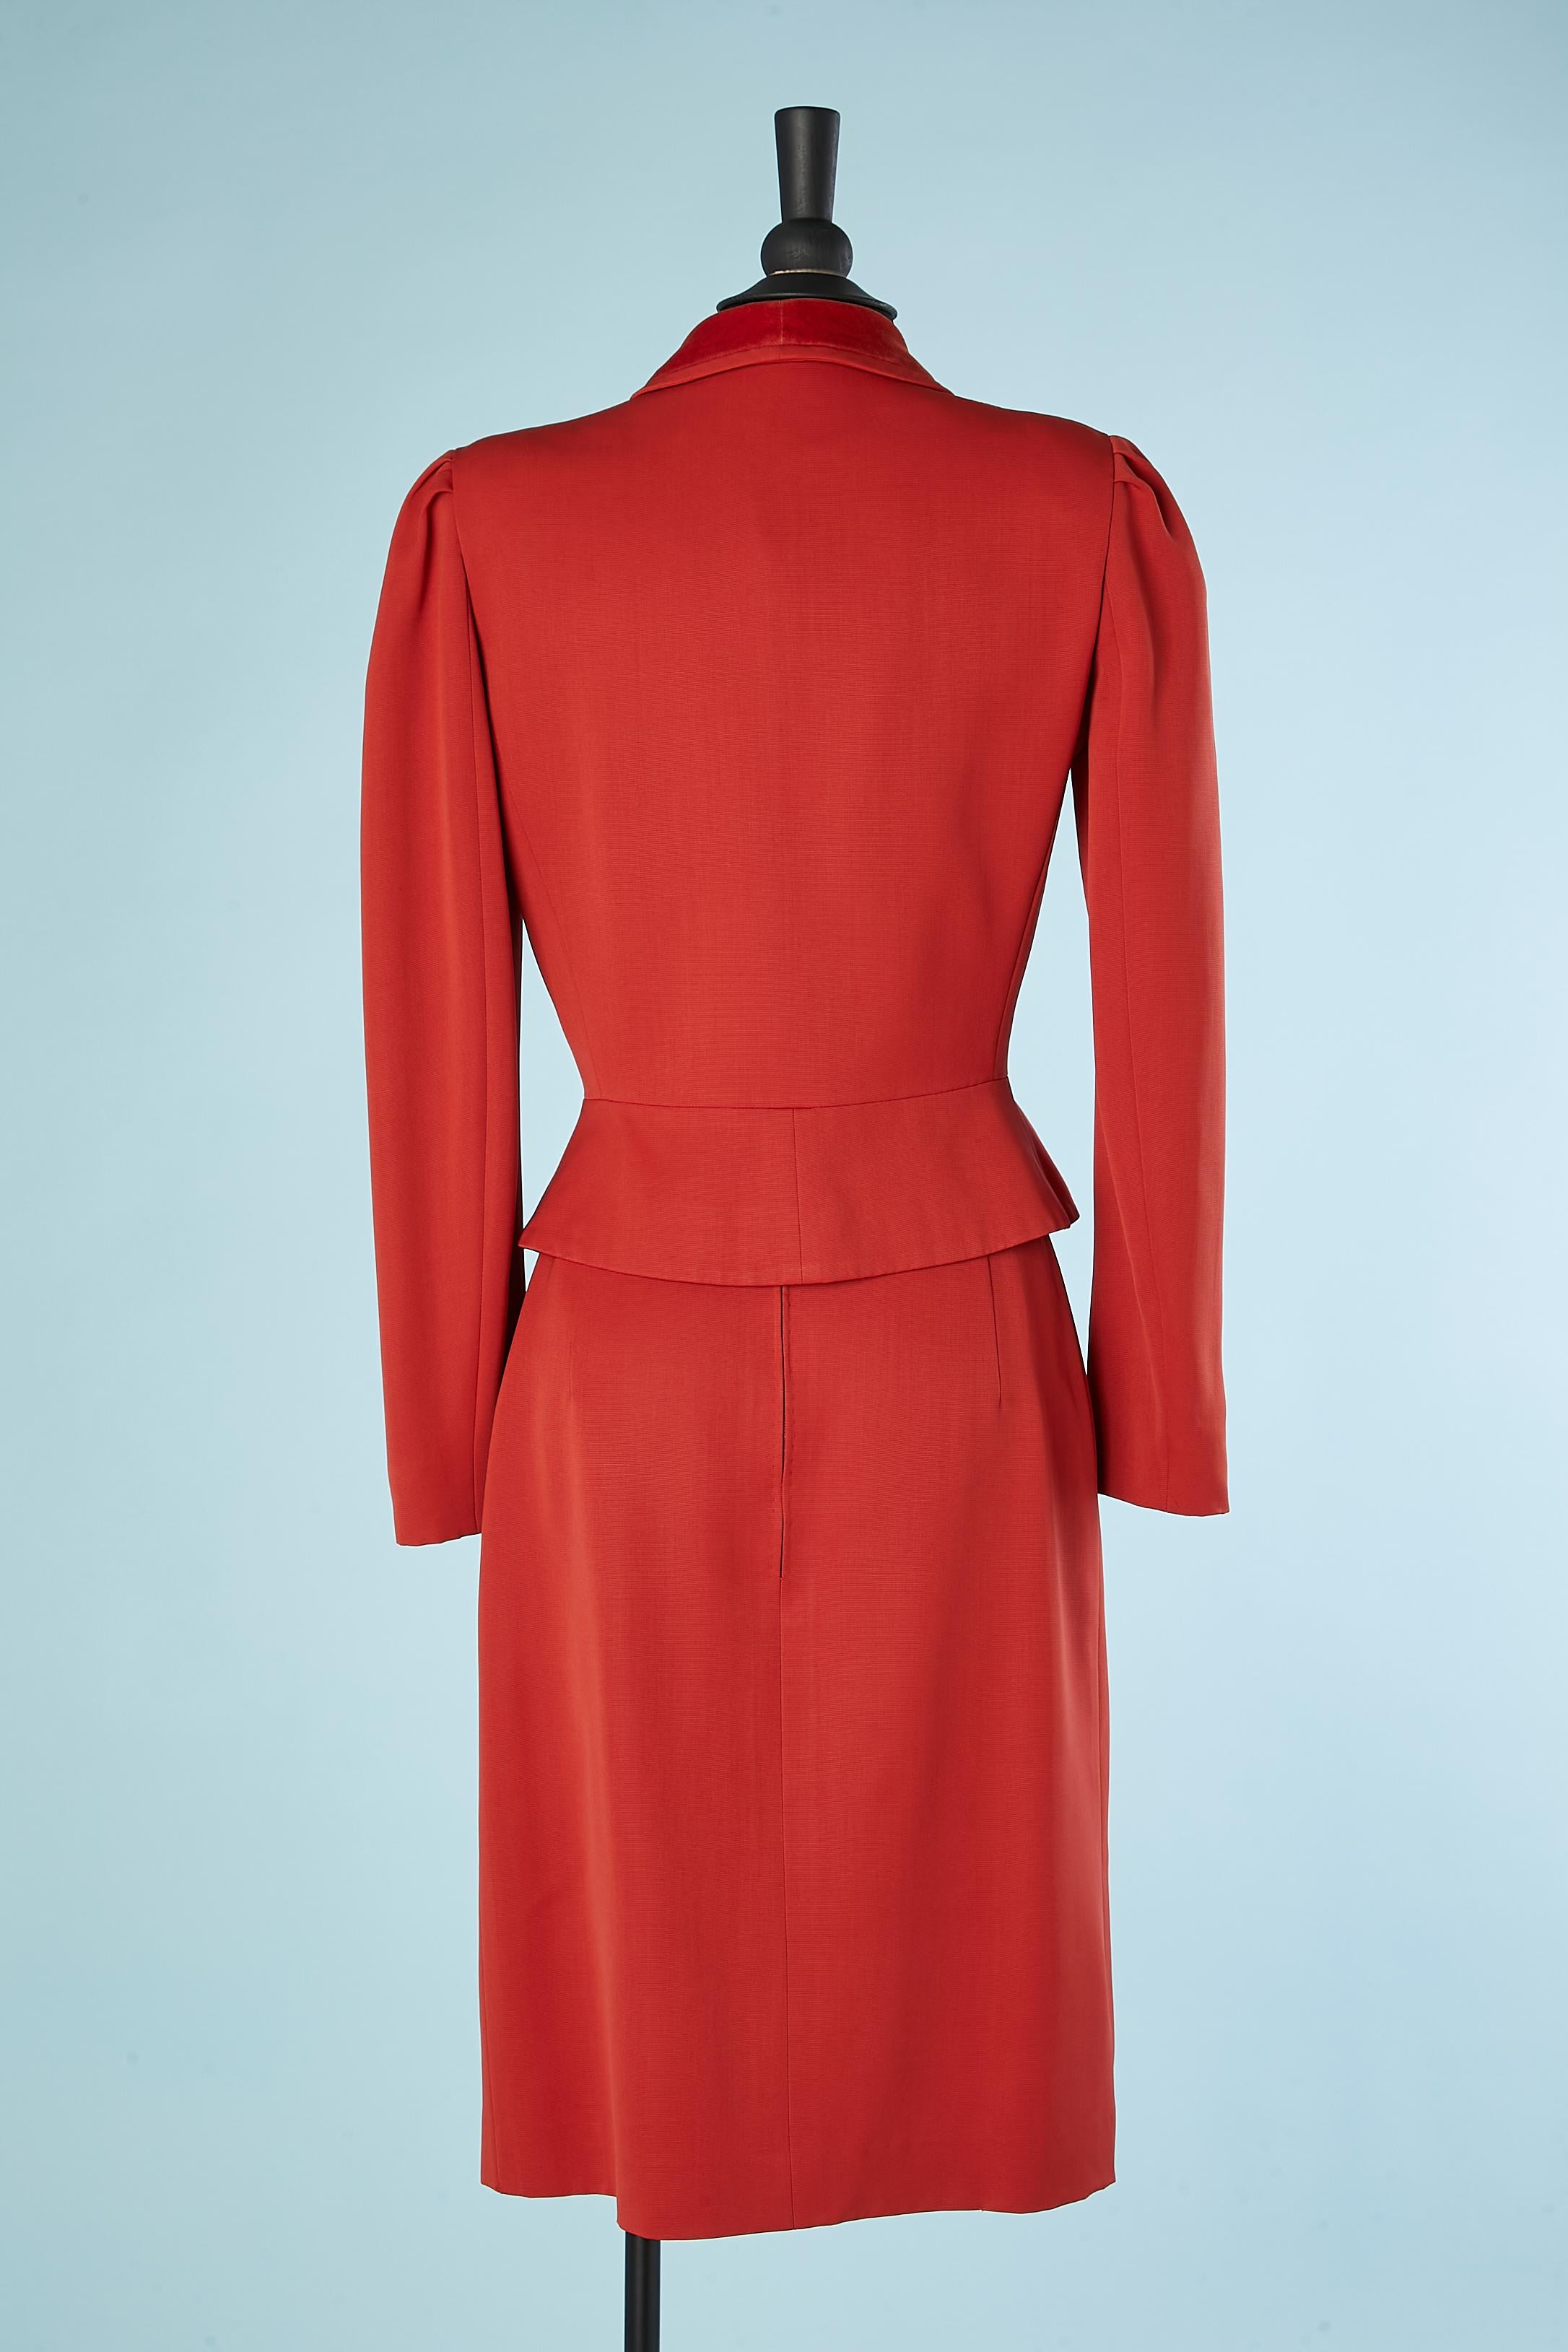 Red wool skirt-suit with velvet collar Lanvin Circa 1960's  For Sale 1